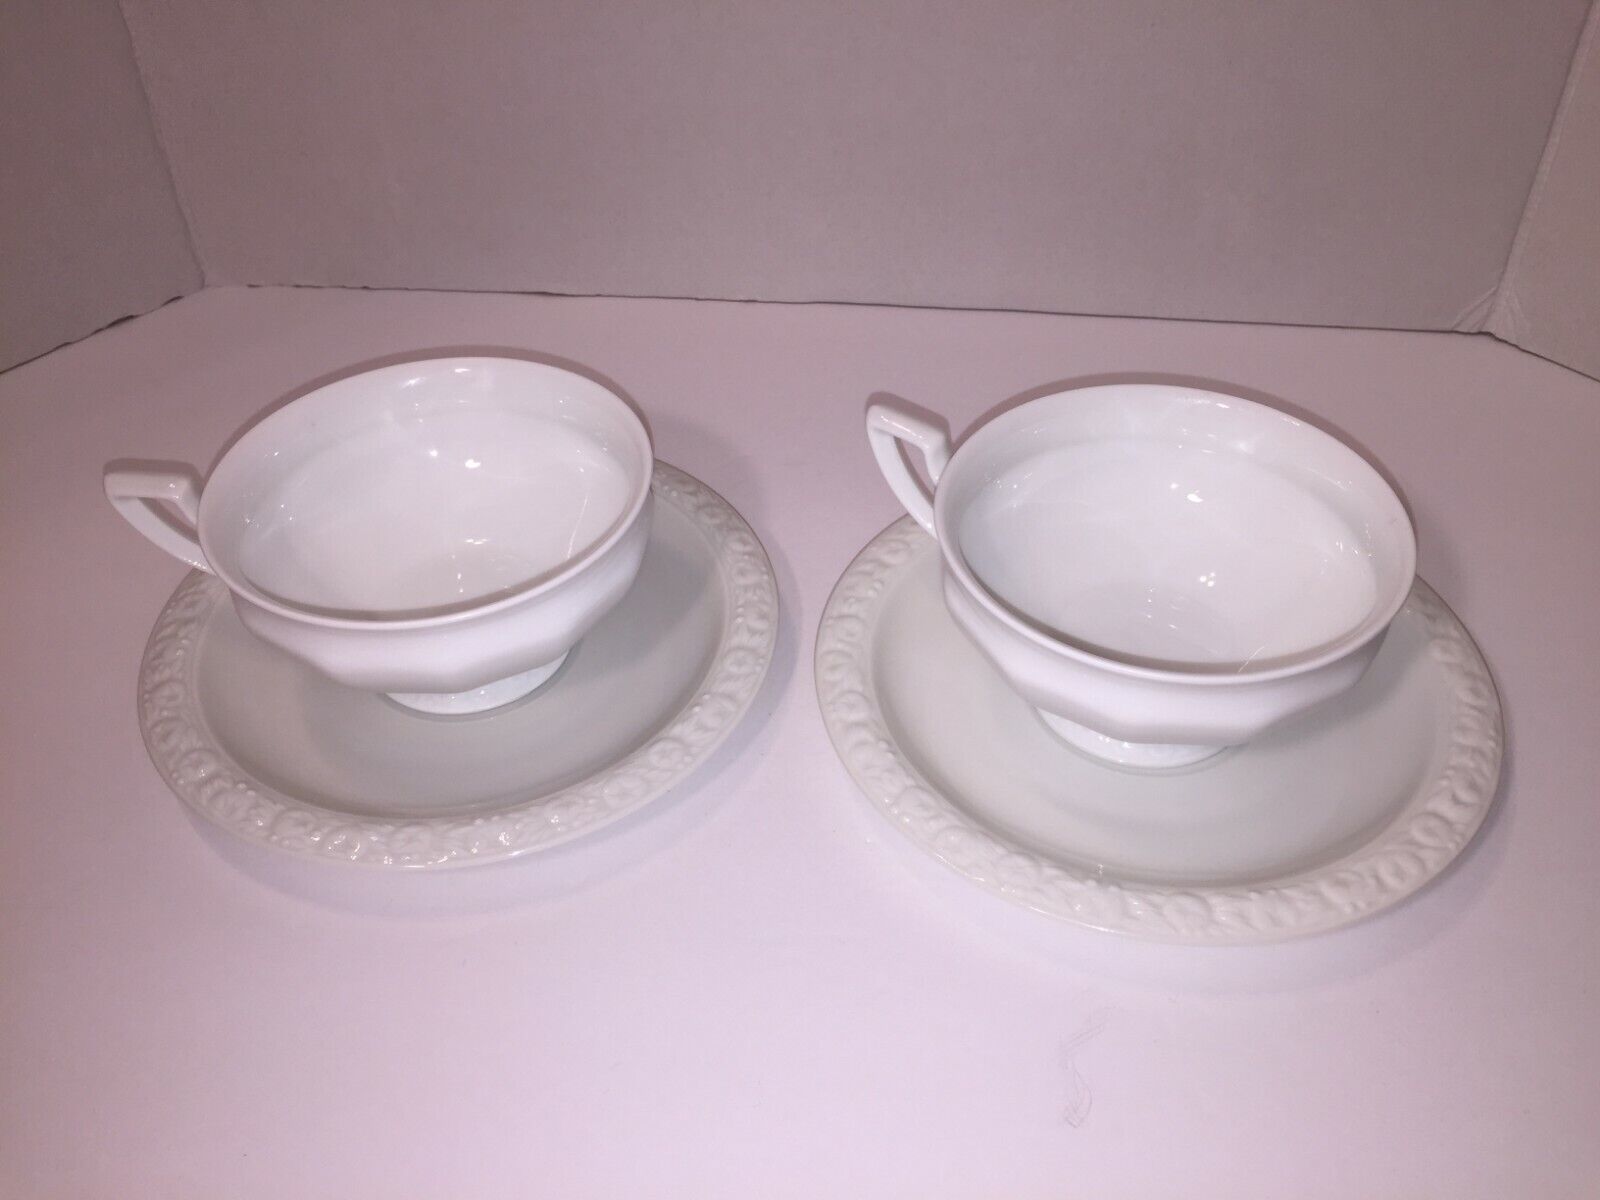 Gorgeous Rosenthale SELB Germany MARIA Porcelain Coffee Tea Cup & Saucer set, x2